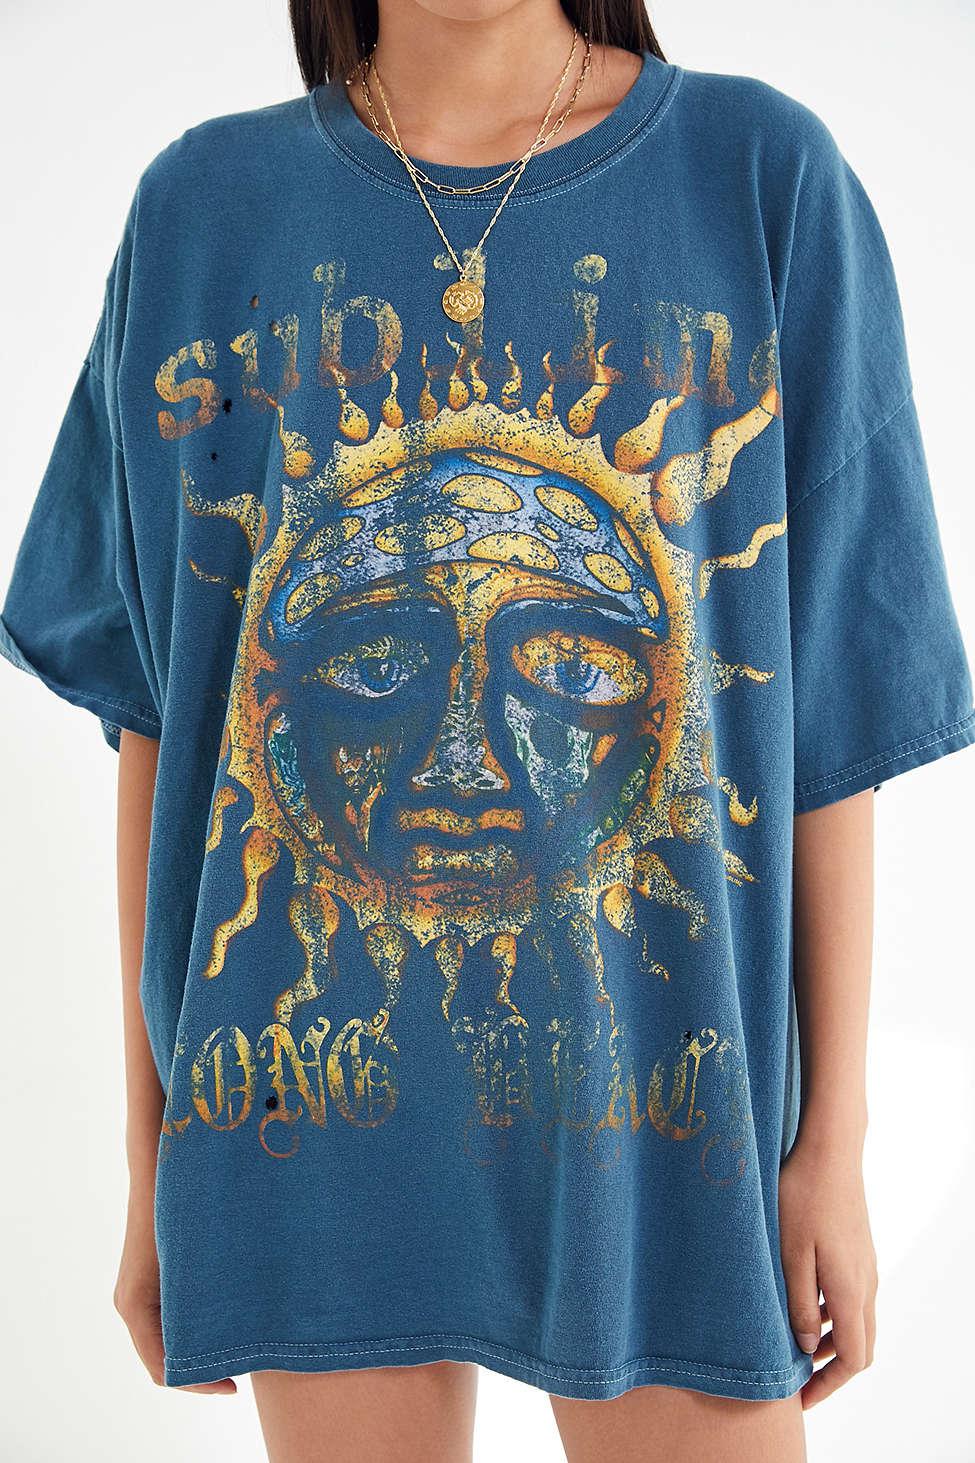 Urban Outfitters Cotton Sublime T-shirt ...